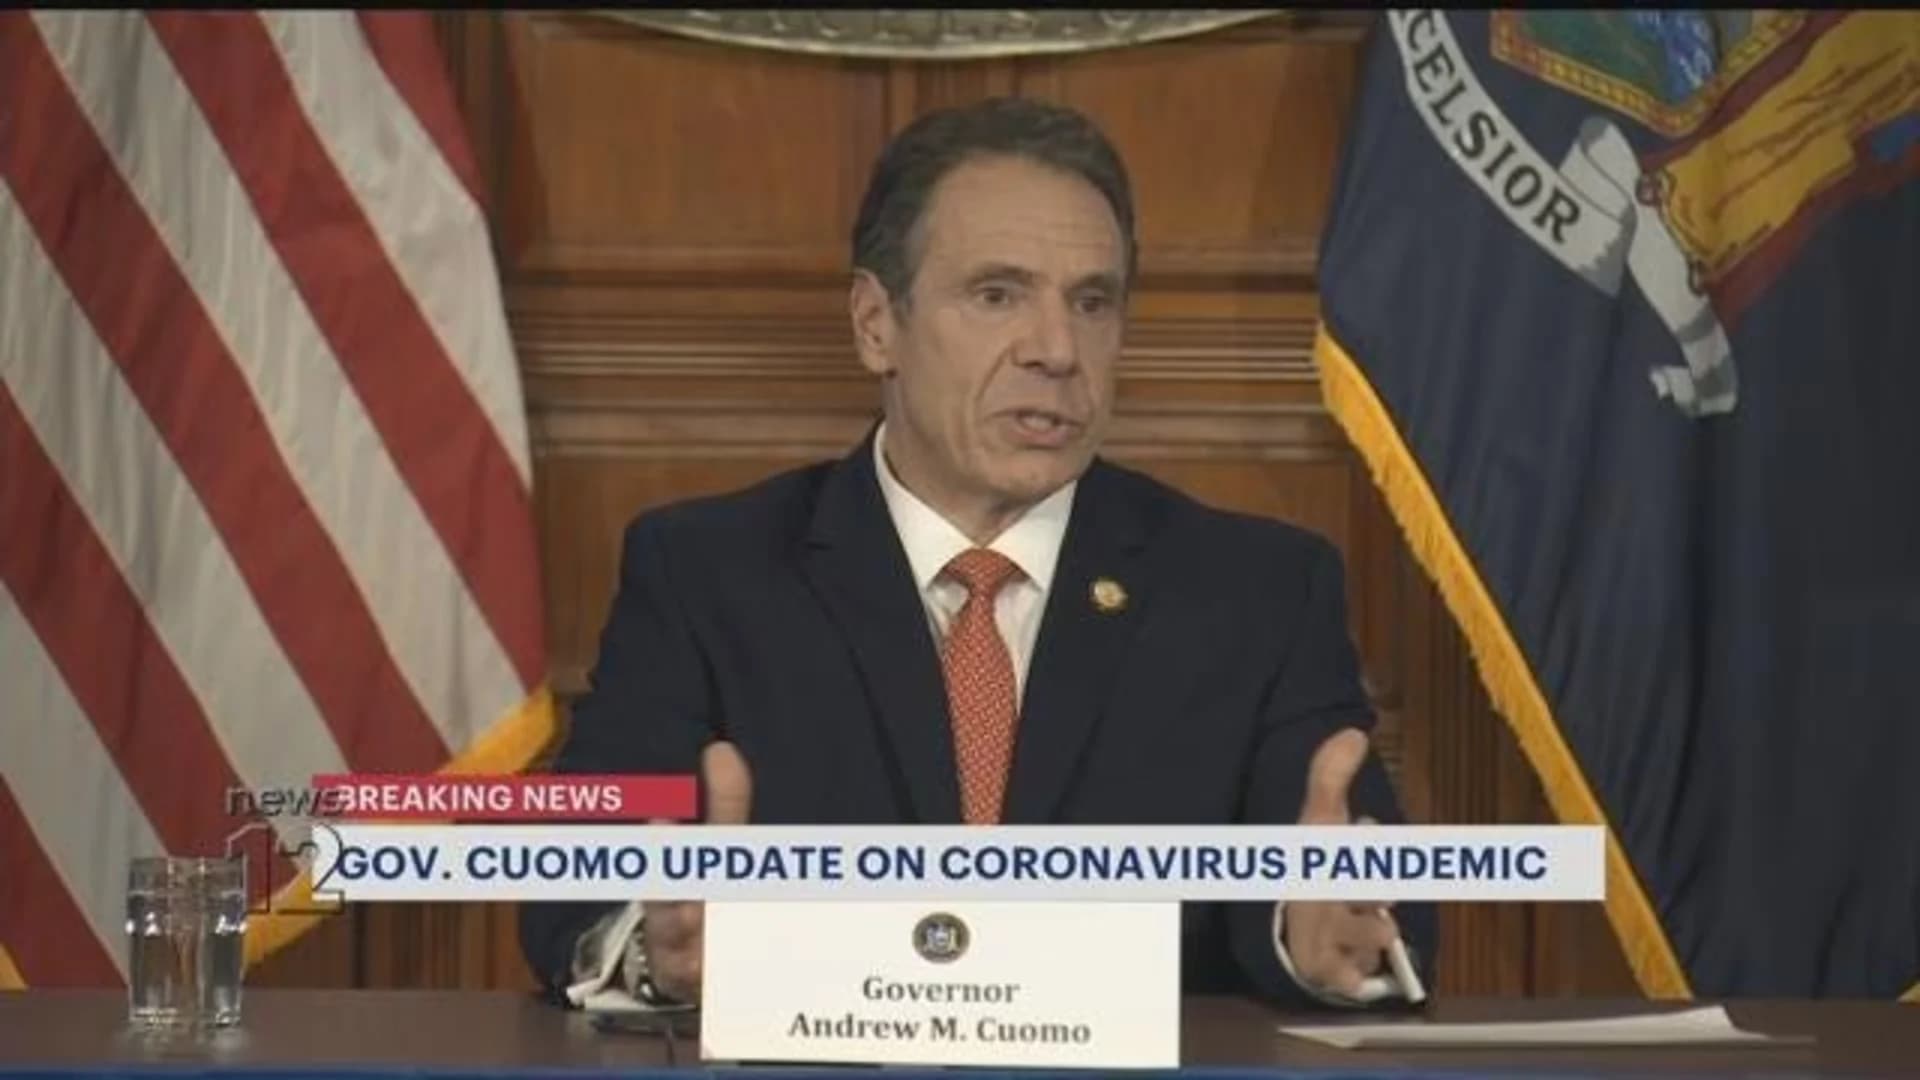 Gov. Cuomo to issue executive order requiring New Yorkers to wear masks, coverings in public